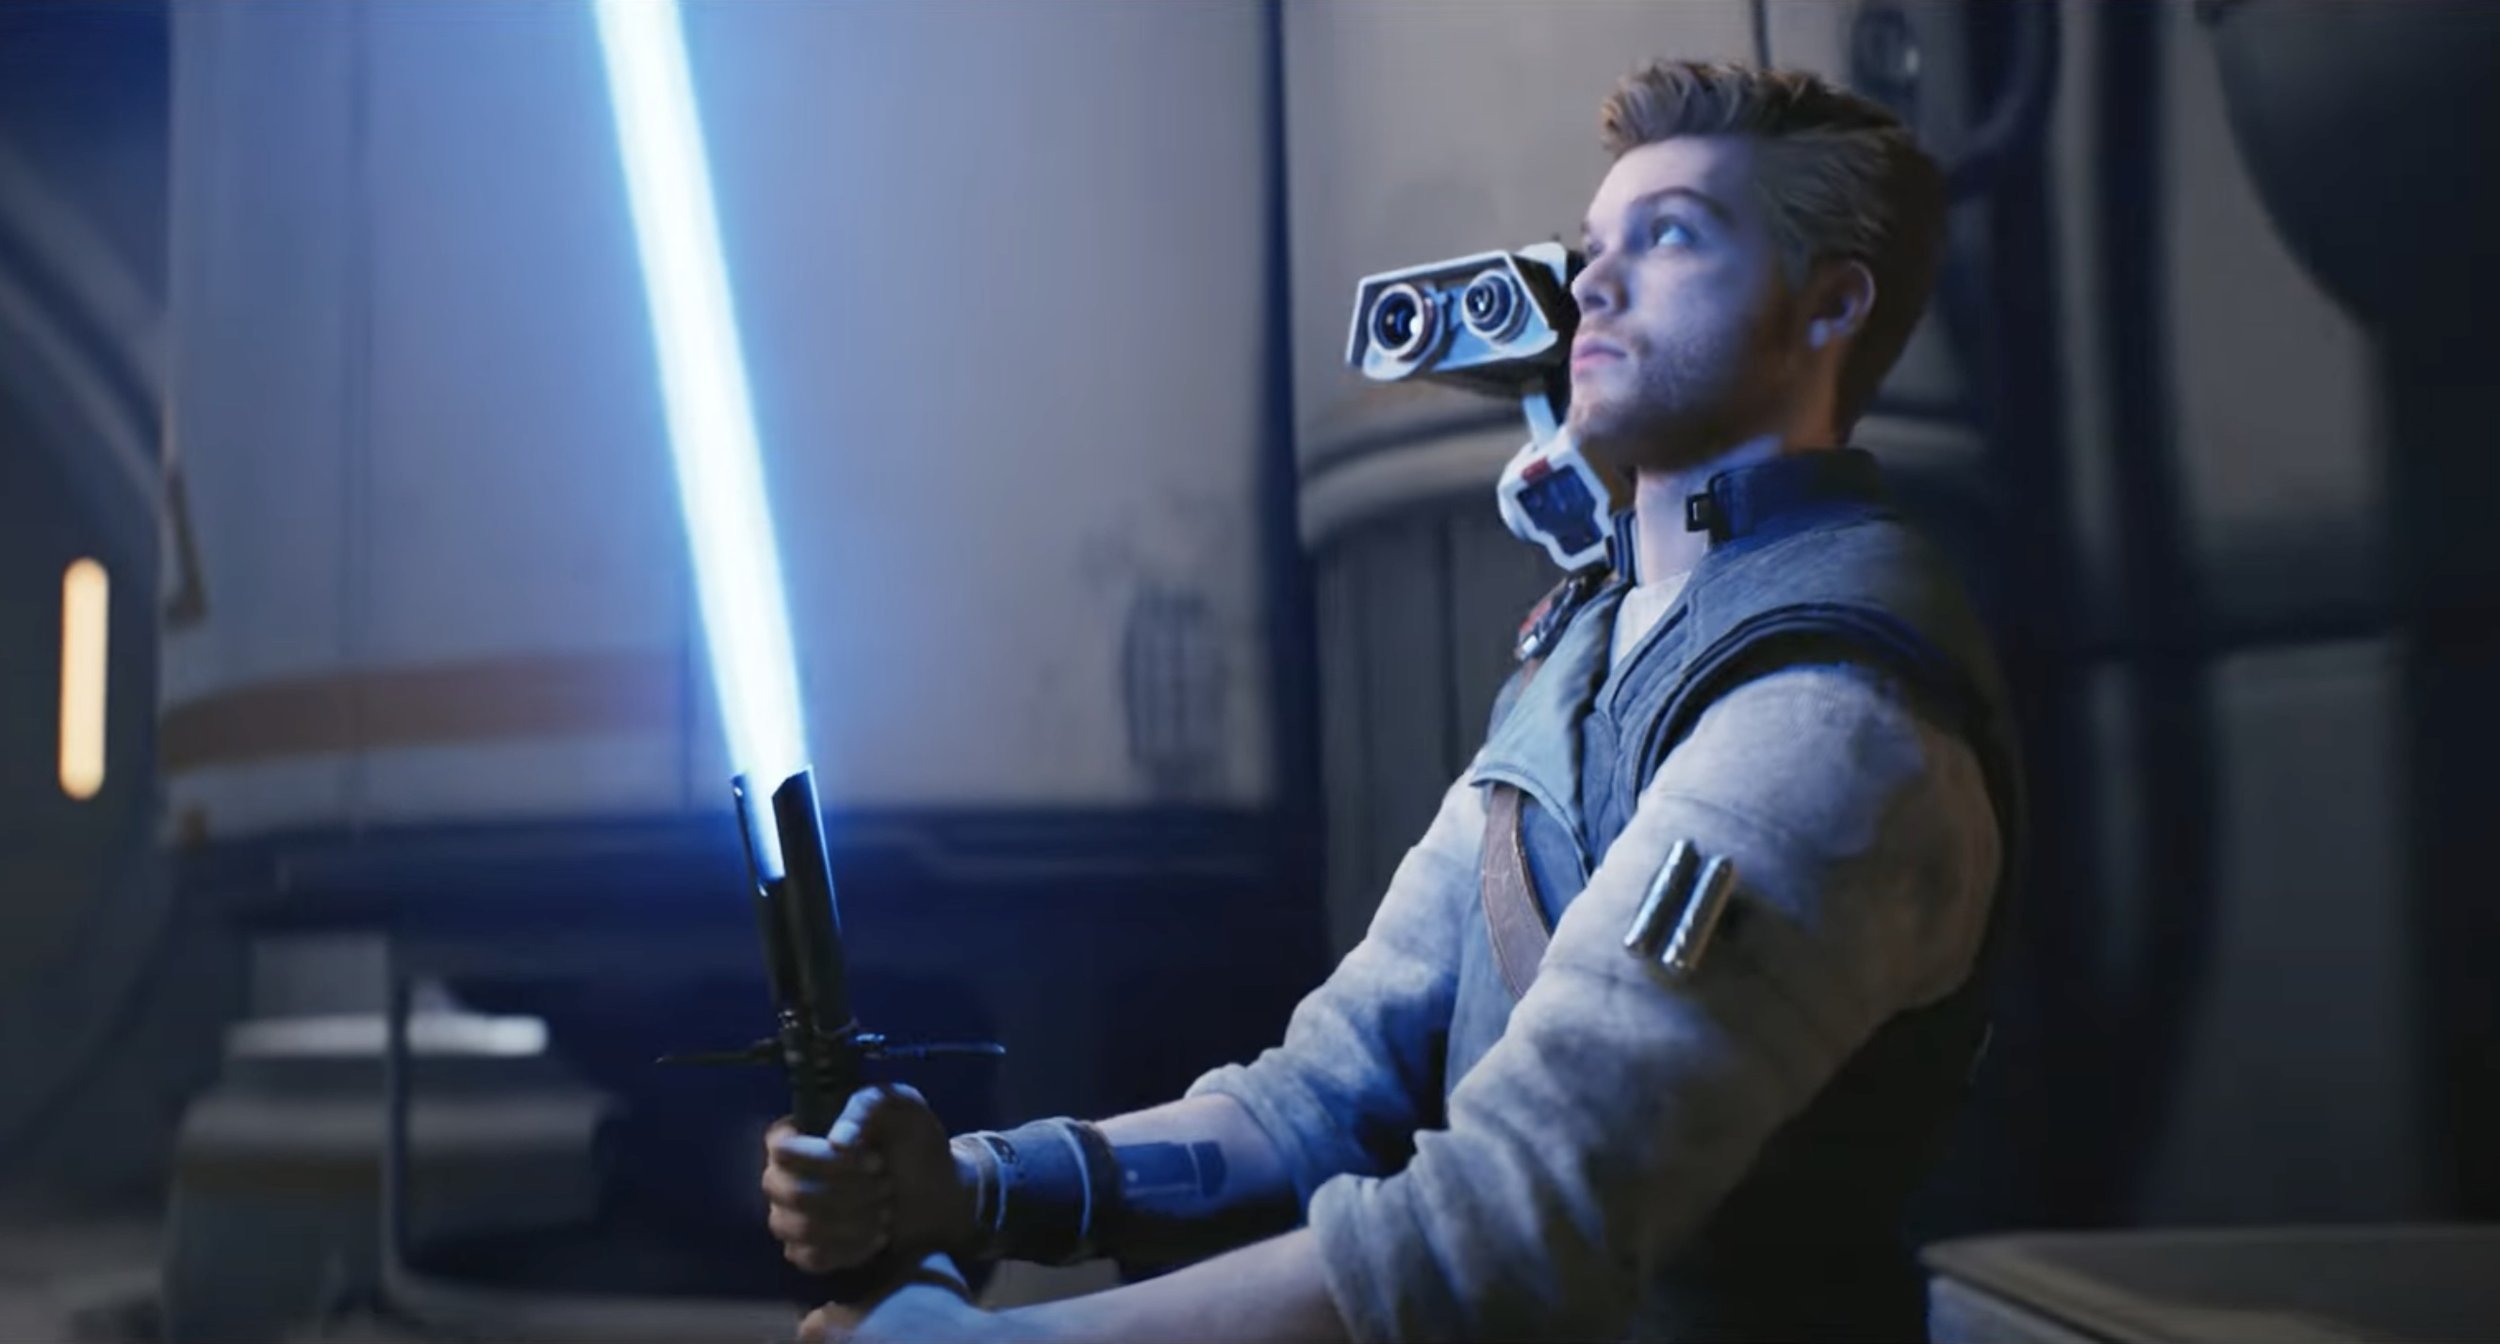 Star Wars Jedi: Survivor will have much larger and more detailed environments than Fallen Order